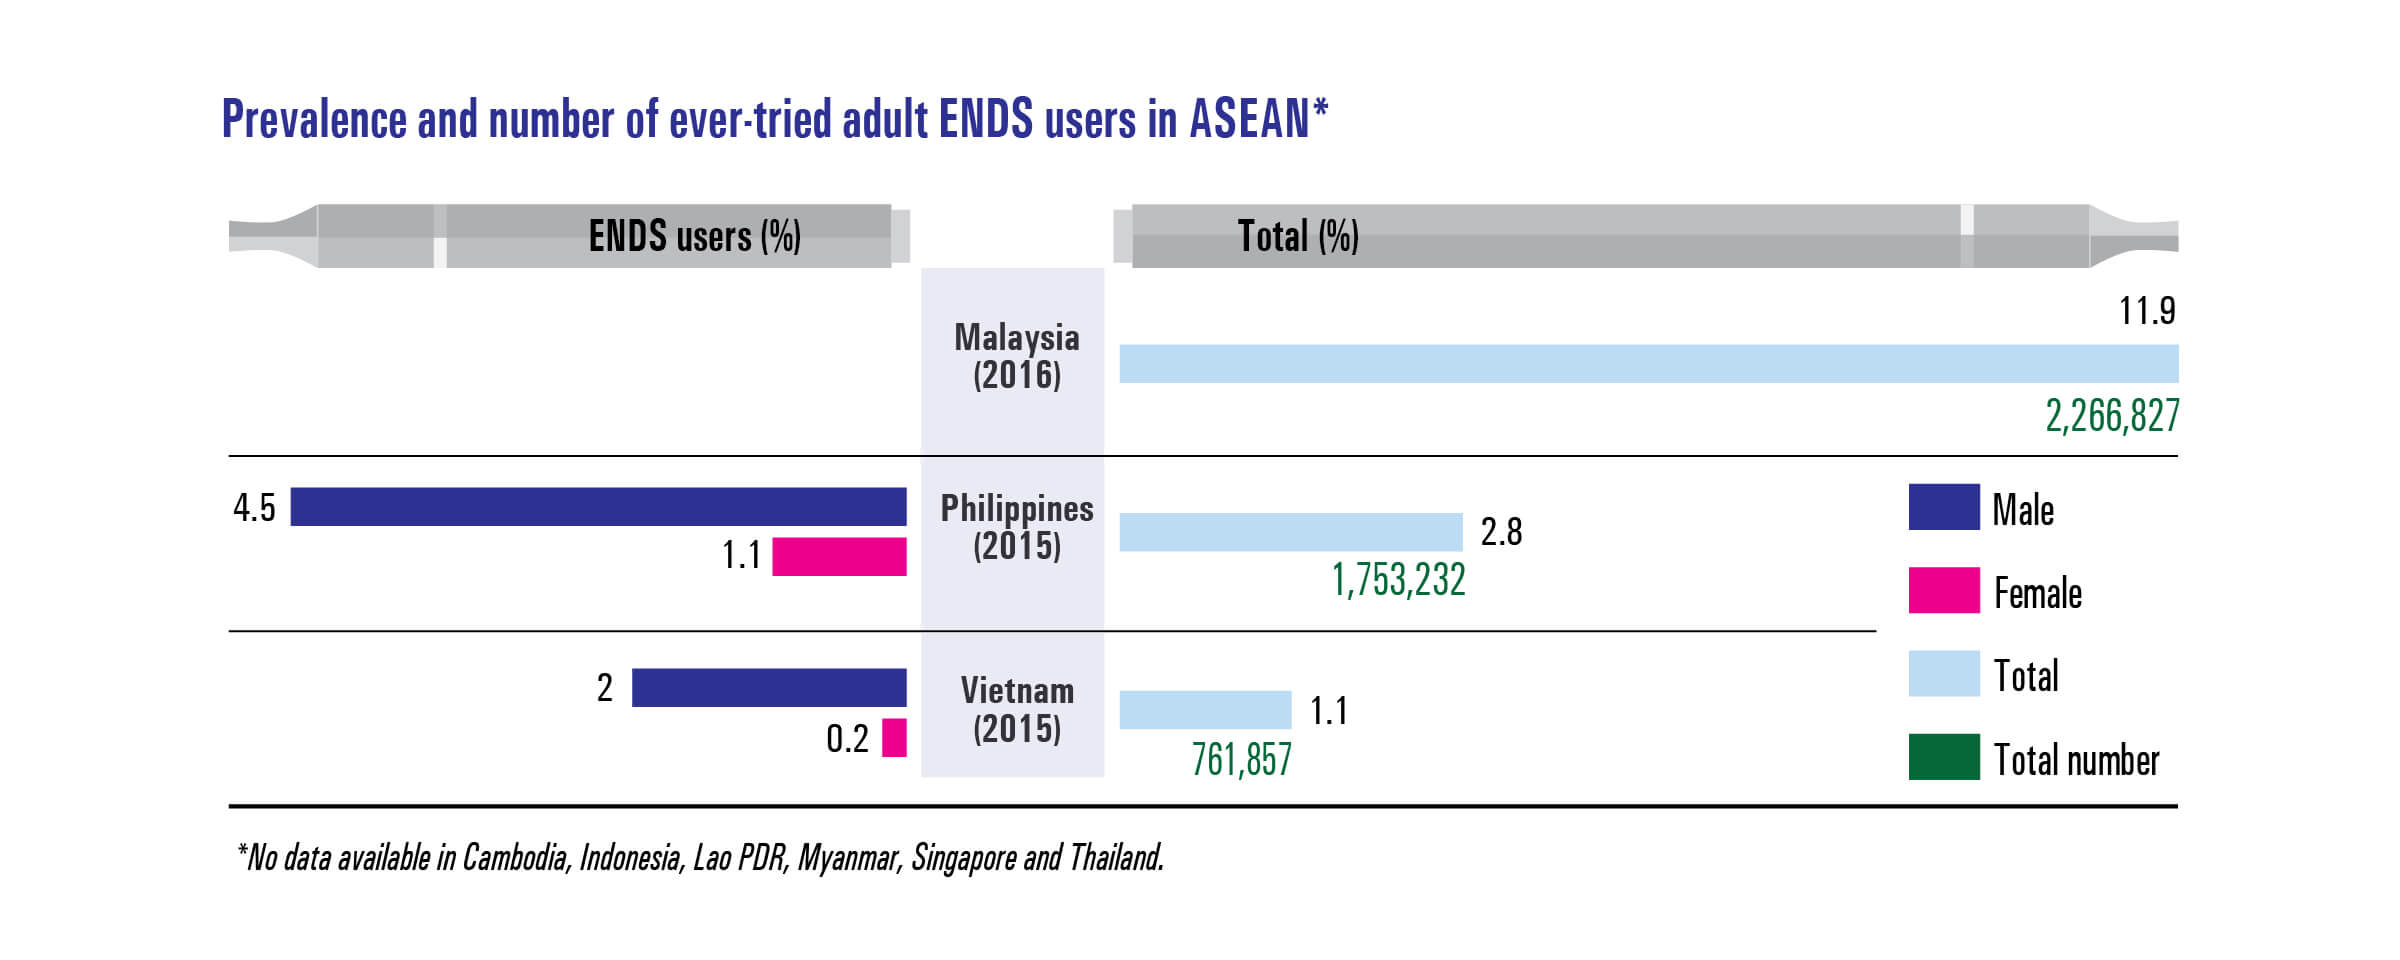 Prevalence and number of ever-tried adult ENDS users in ASEAN*